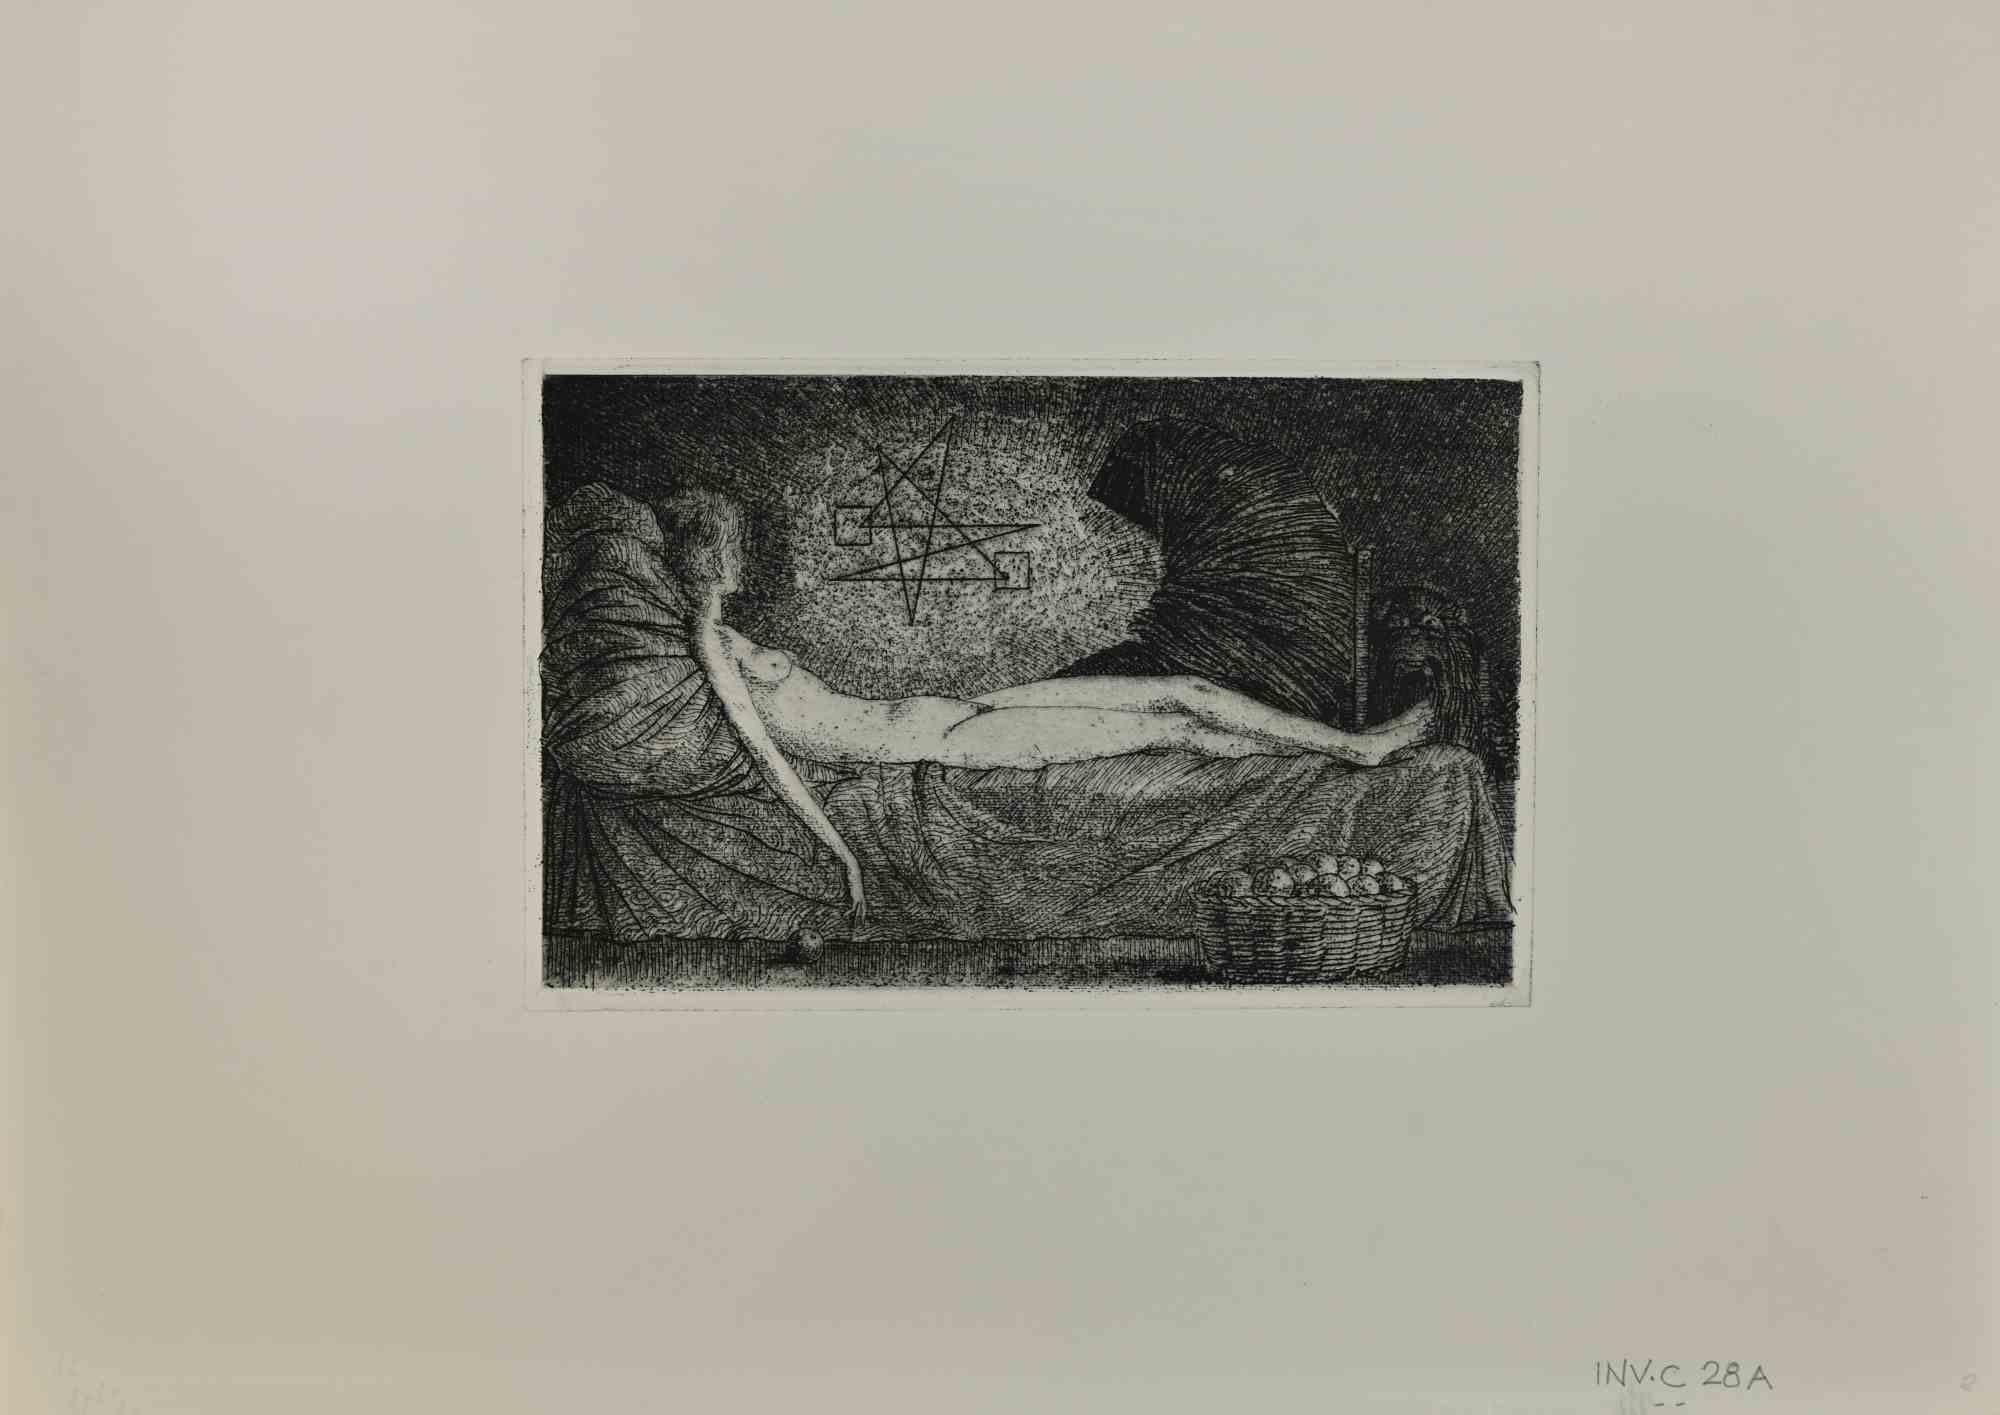 Sybil is an Etching realized by Leo Guida in 1970s.

Good condition, no signature.

Artist sensitive to current issues, artistic movements and historical techniques, Leo Guida has been able to weave a productive interview on art and the function of